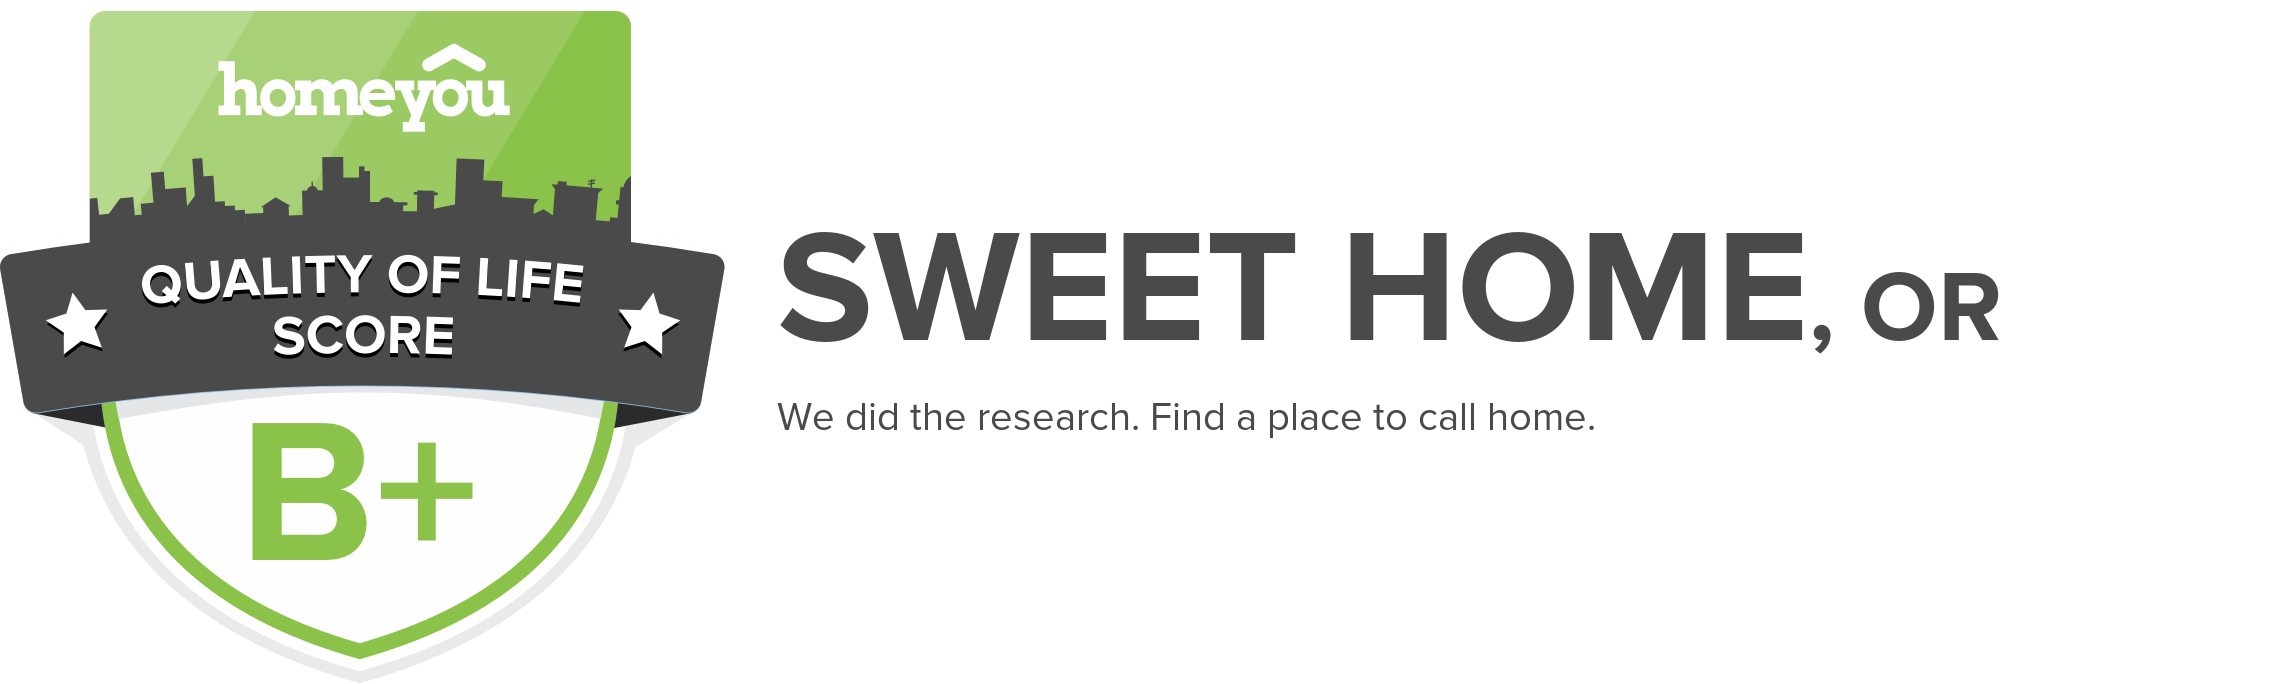 Sweet Home, OR